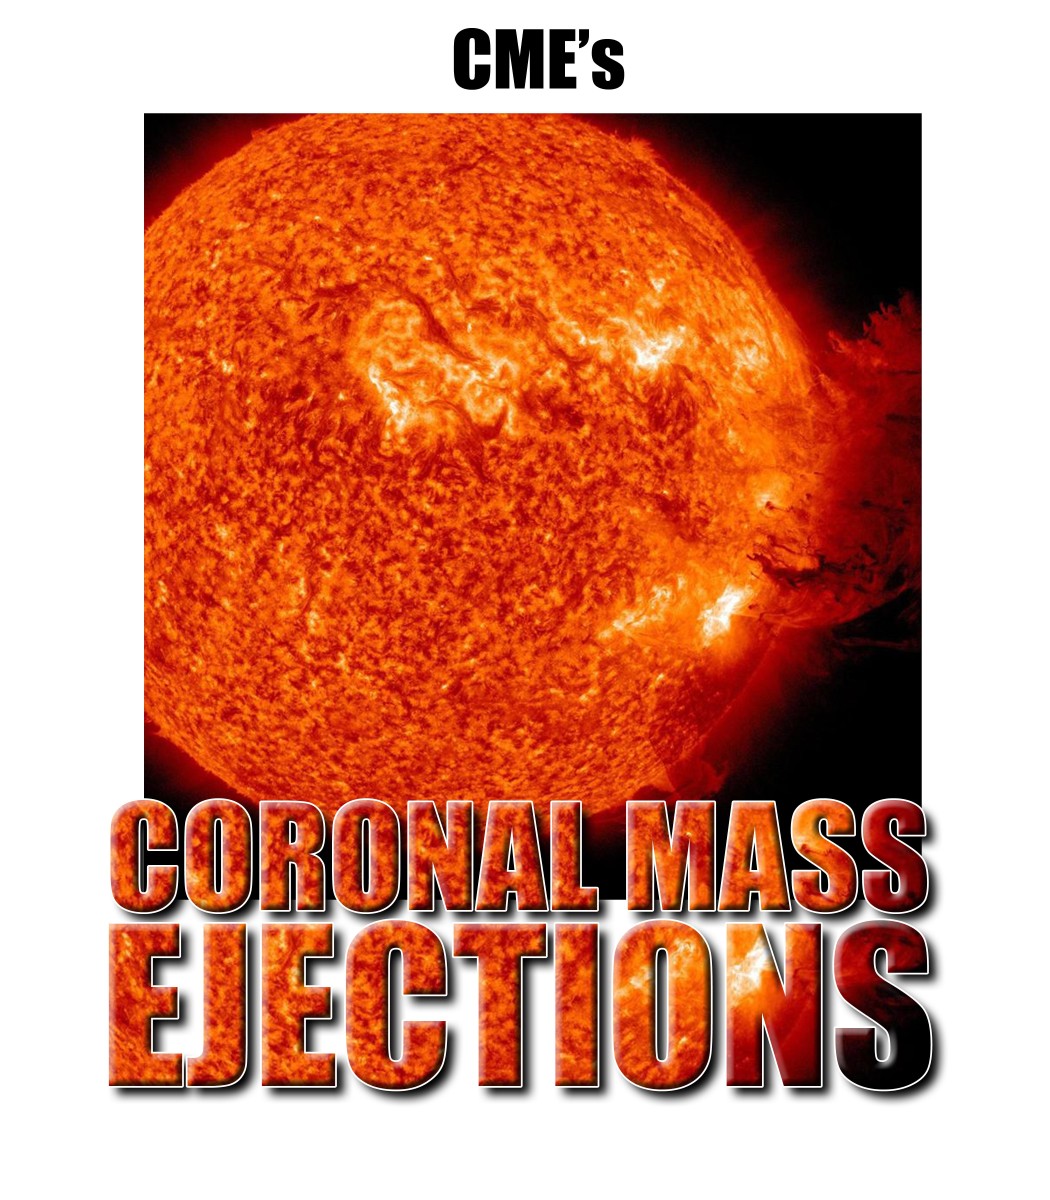 Once again NASA is playing the CME, Solar Flare warning as a cover for Nibiru Planet X, the question is how long will the public buy their nonsense?